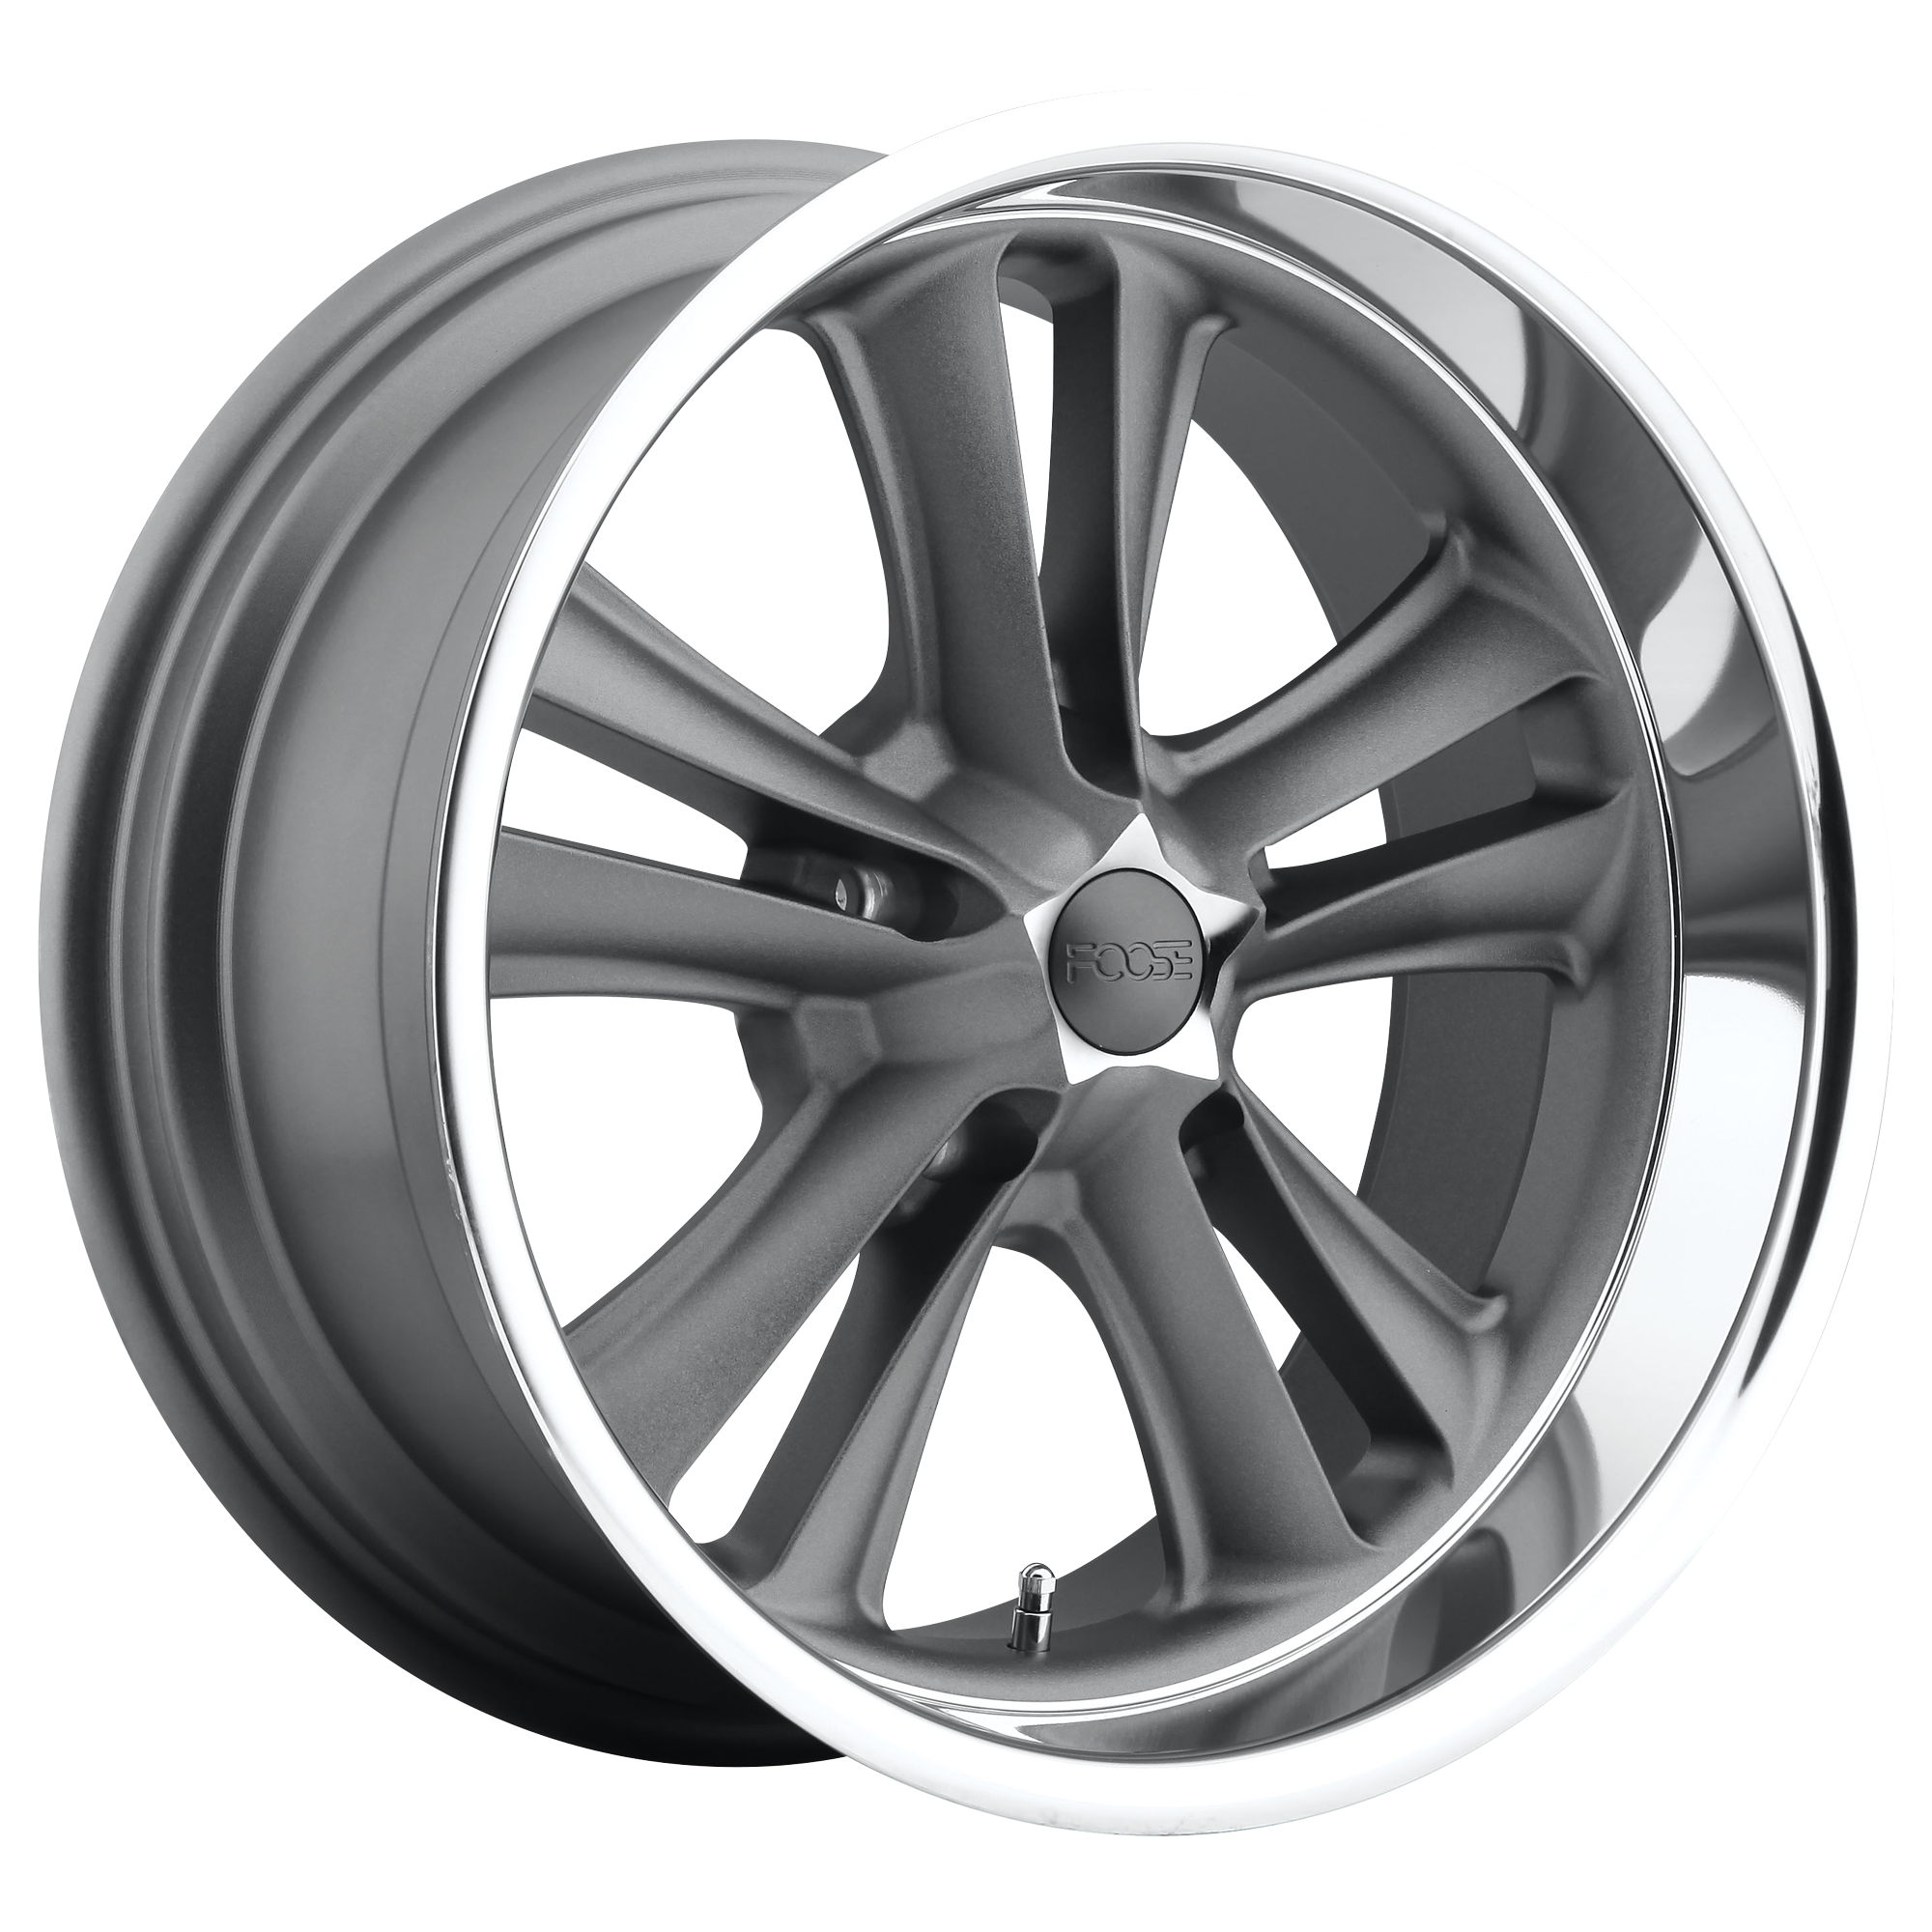 KNUCKLE 18x9.5 5x120.65 MATTE GUN METAL MACHINED (1 mm) - Tires and Engine Performance